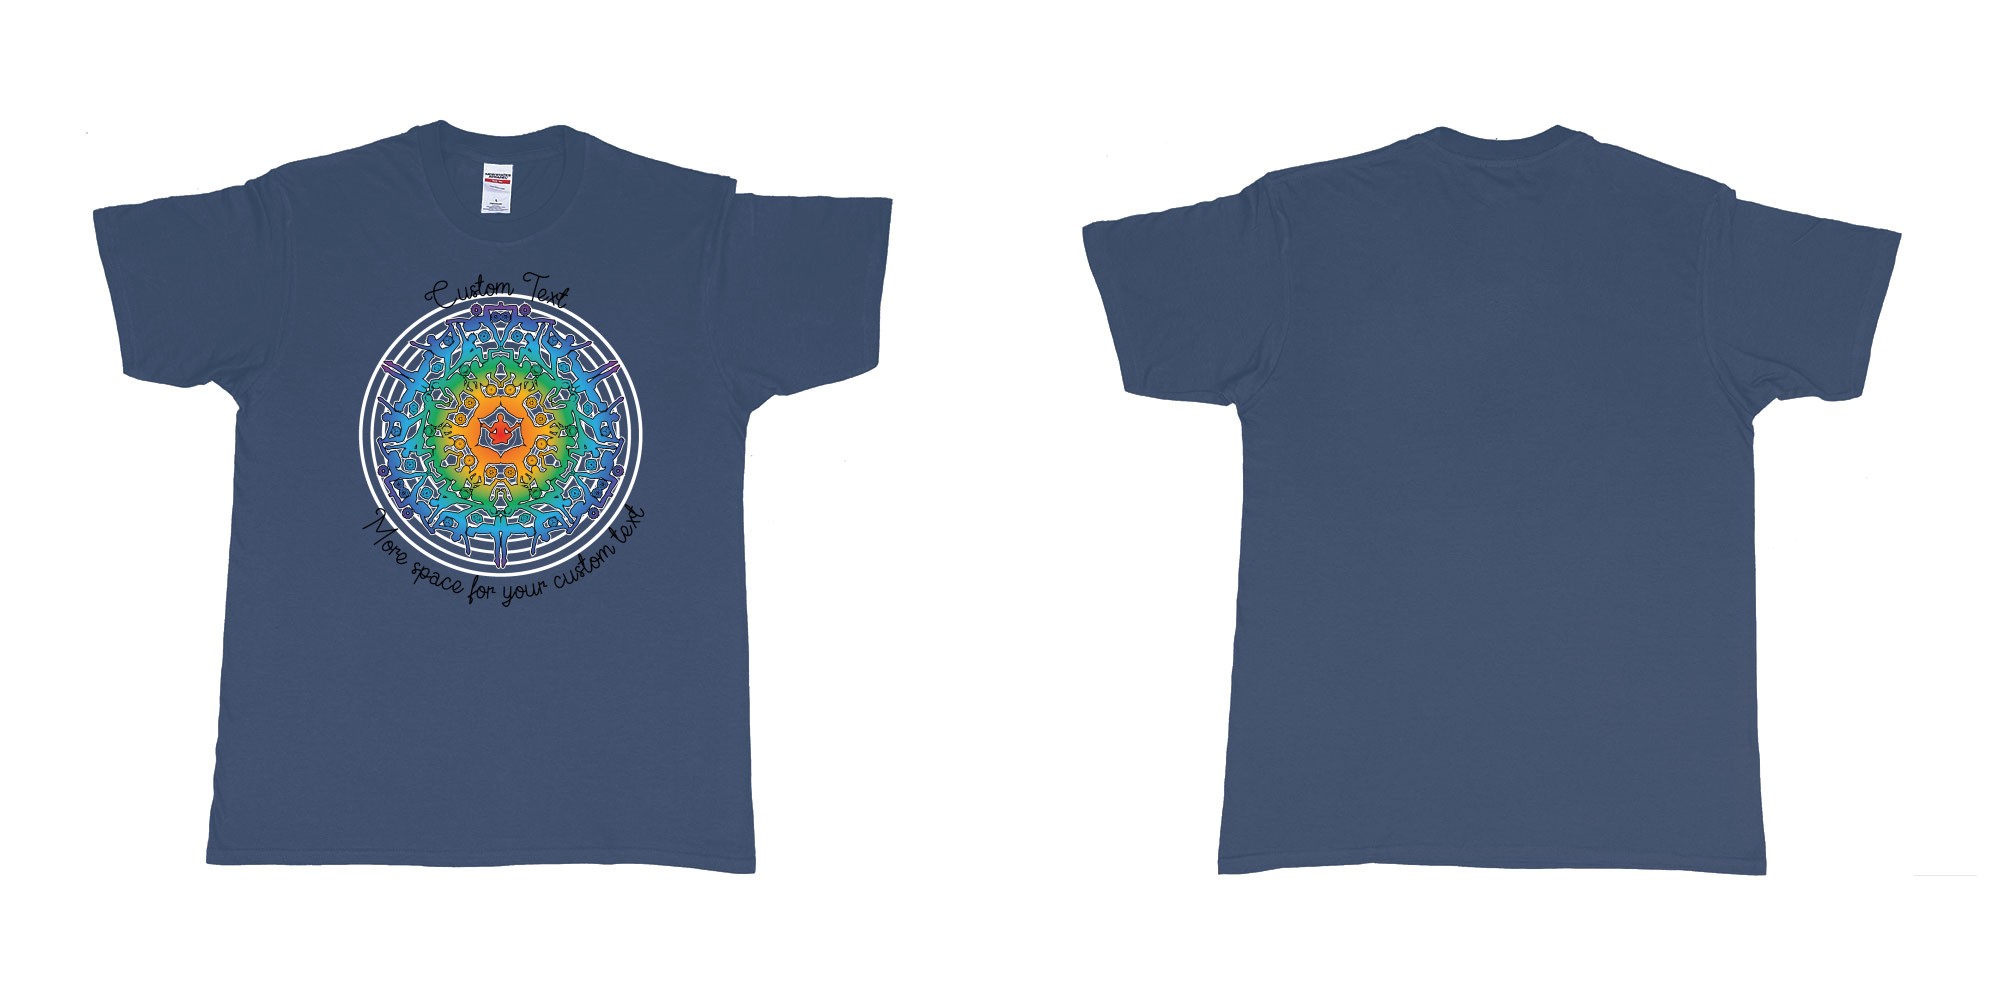 Custom tshirt design yoga mandala in fabric color navy choice your own text made in Bali by The Pirate Way